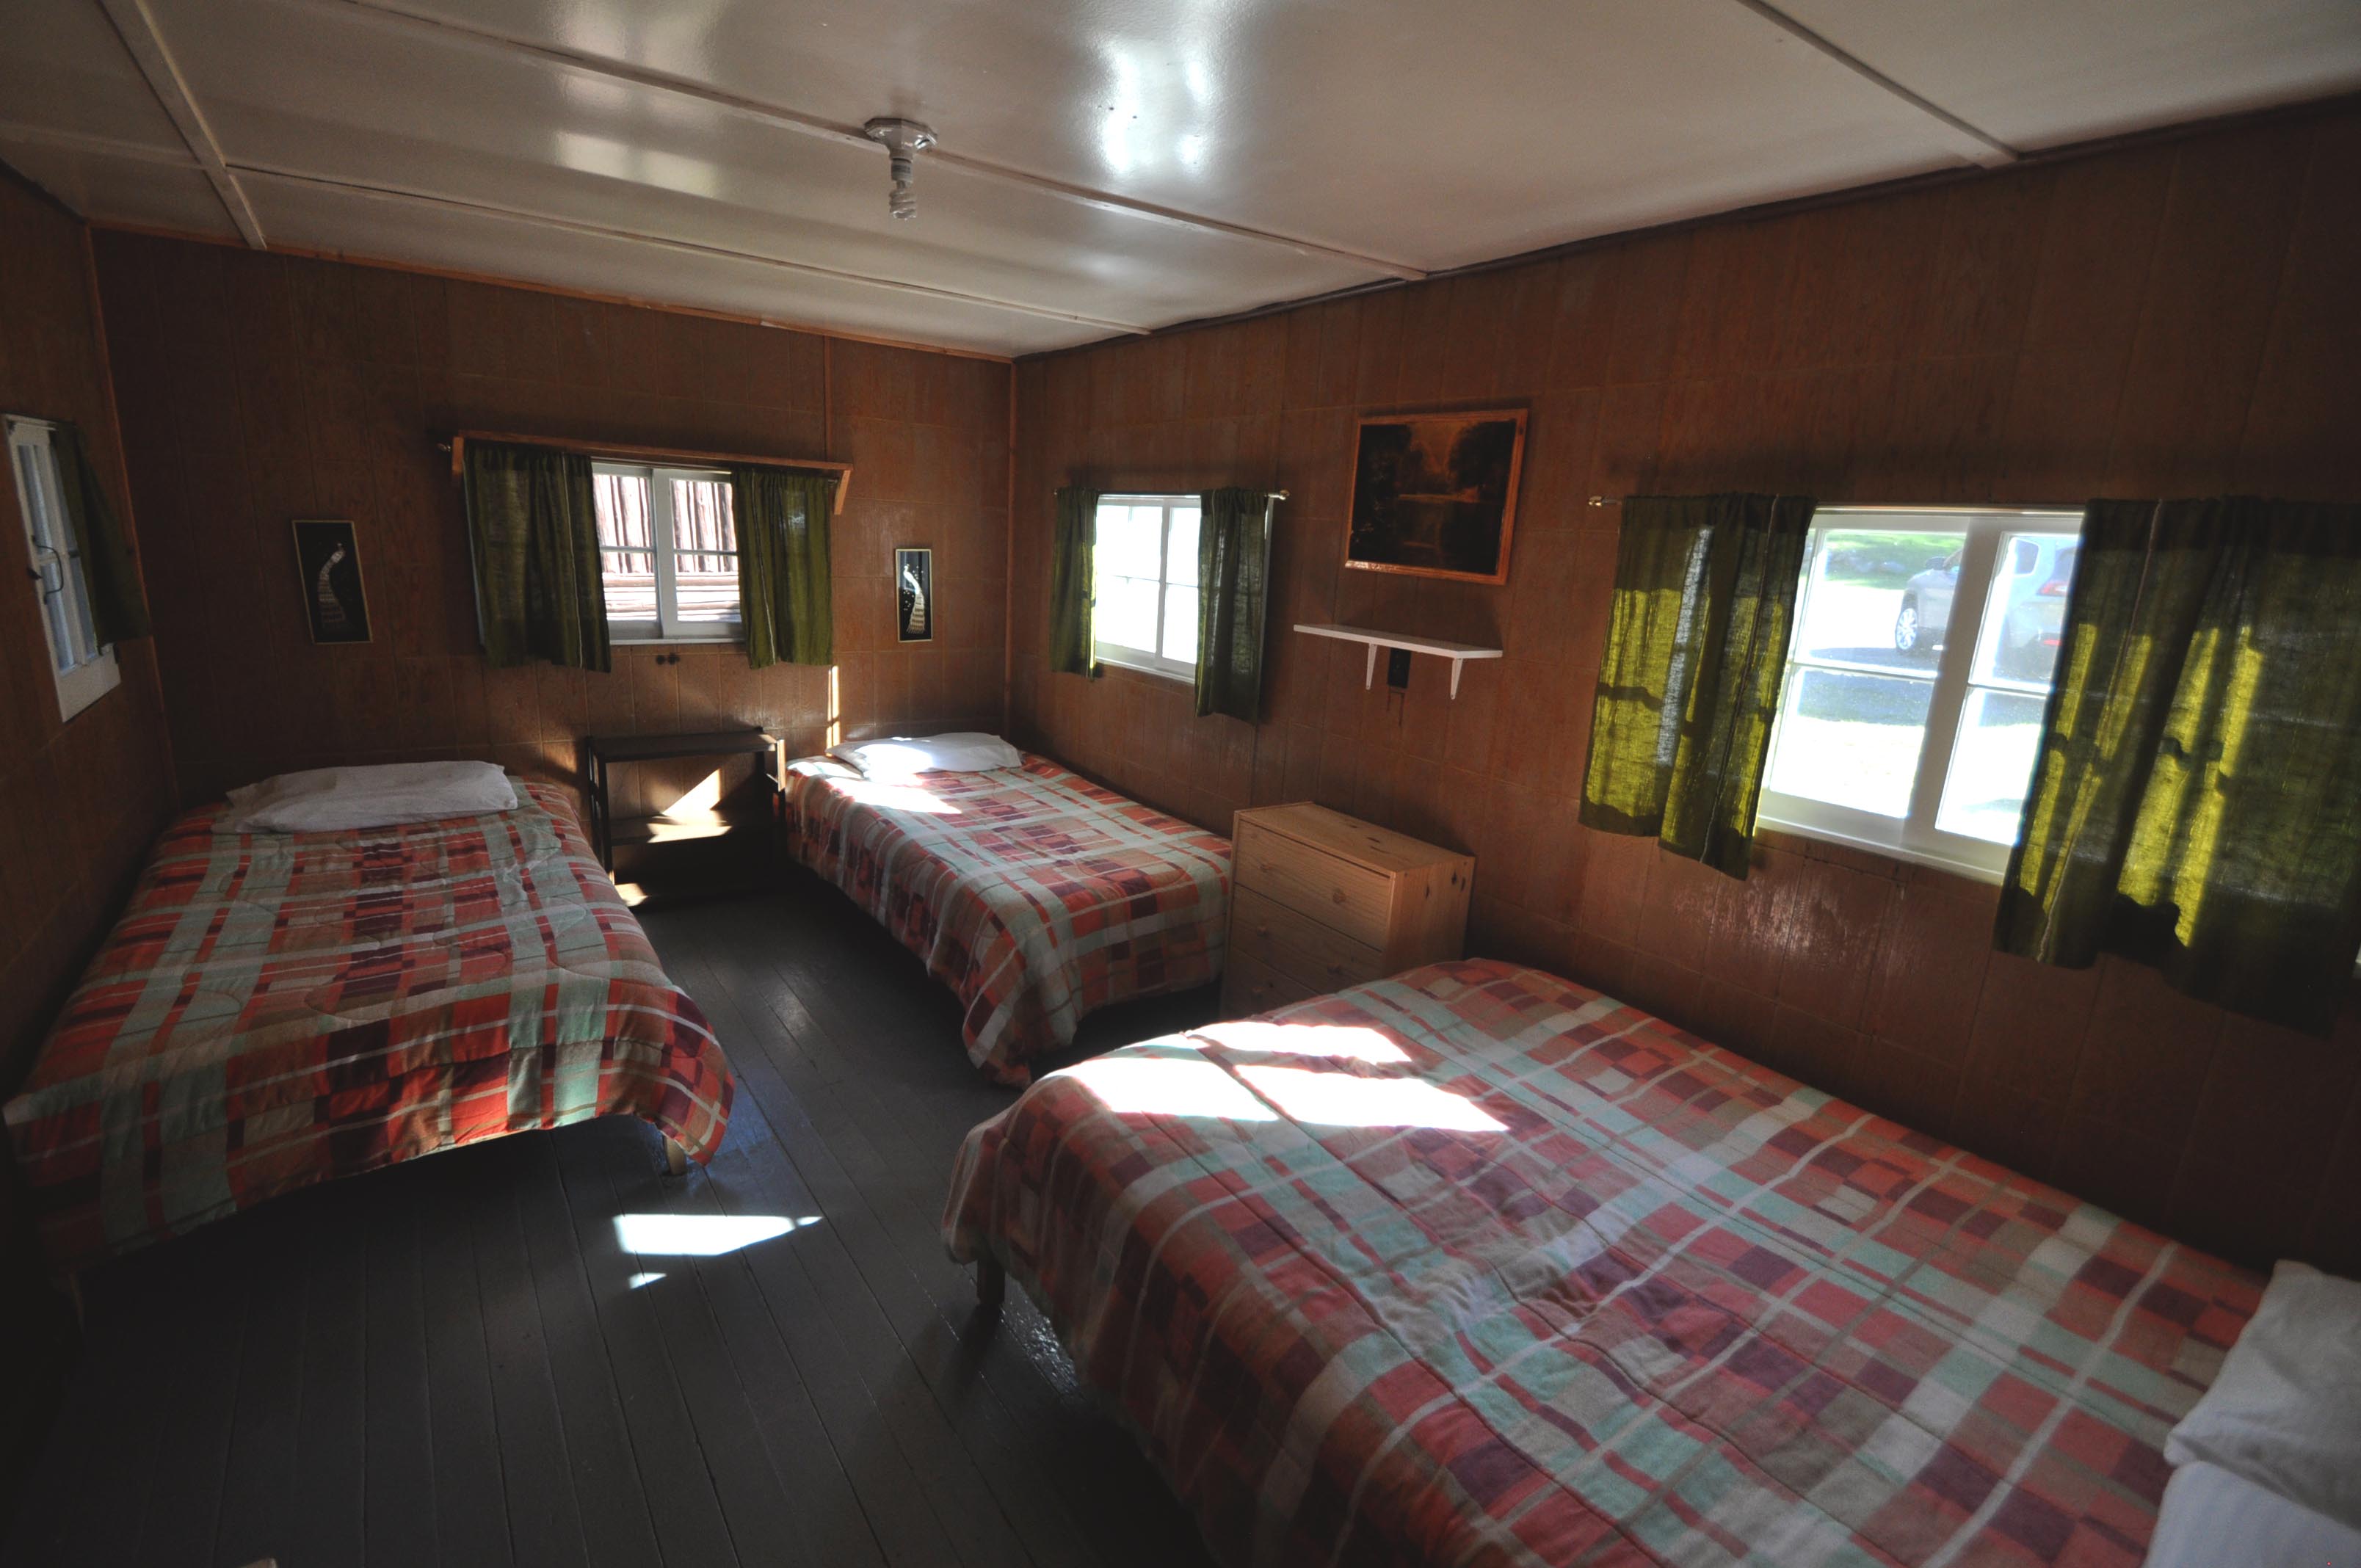 Cabin 6 - bedroom with three beds.